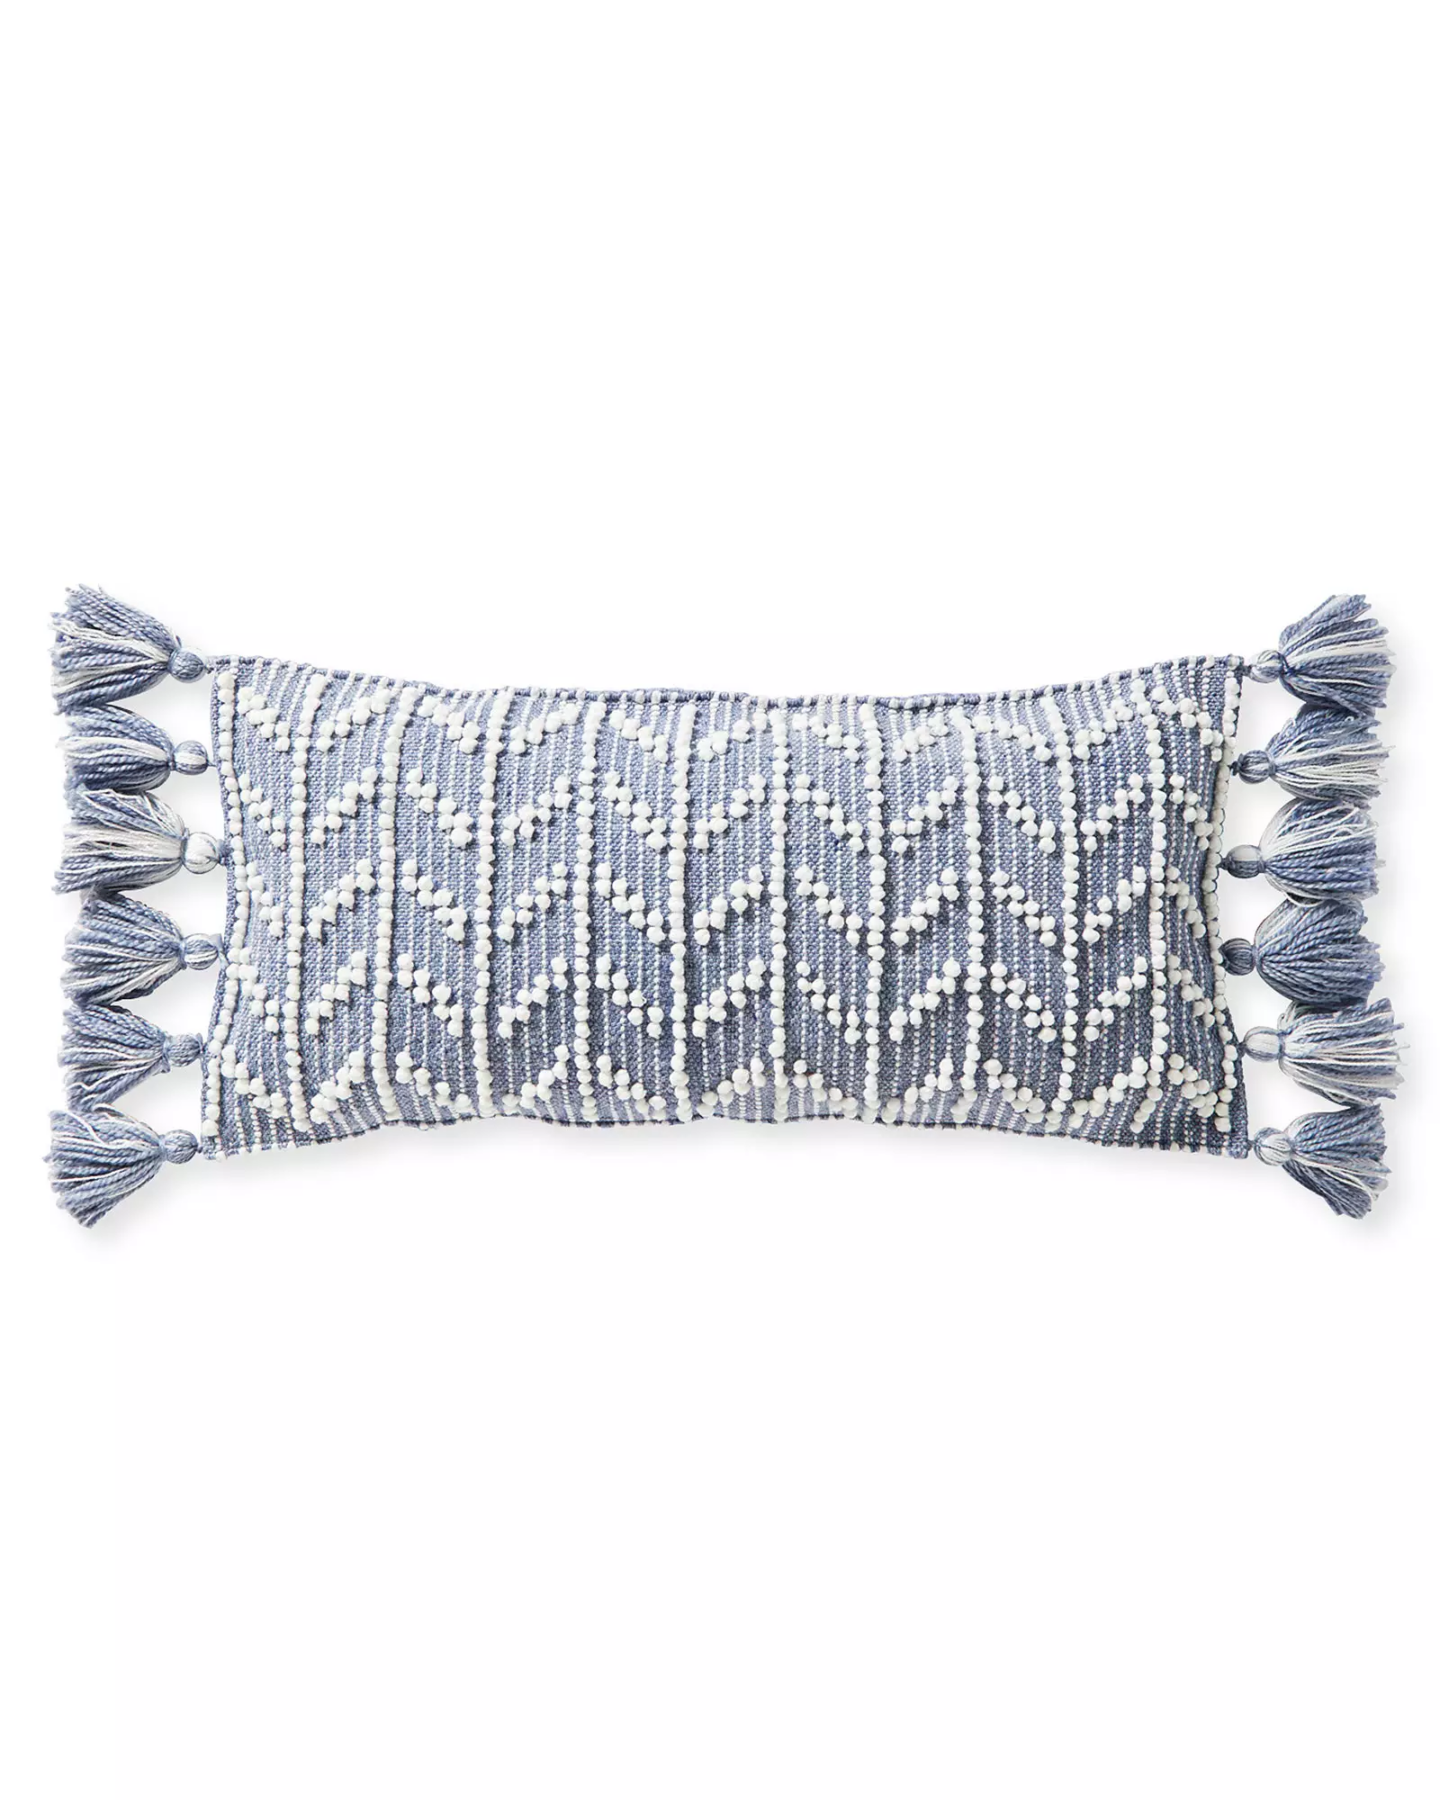 Blue-grey pillow with tassels, Serena & Lily